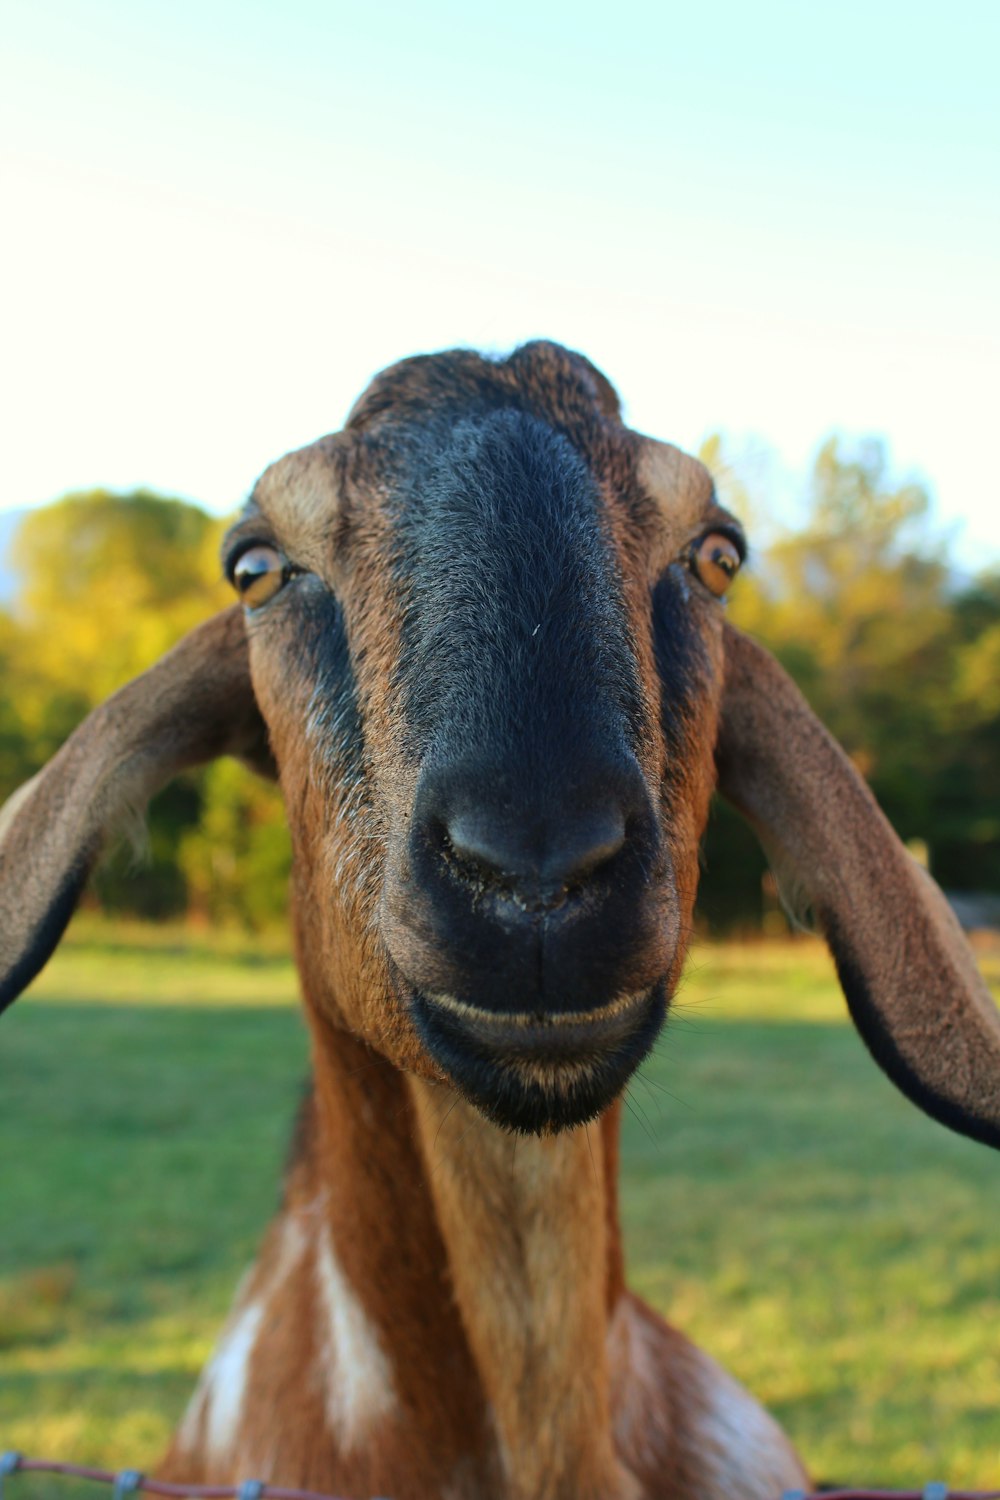 a close up of a goat looking at the camera